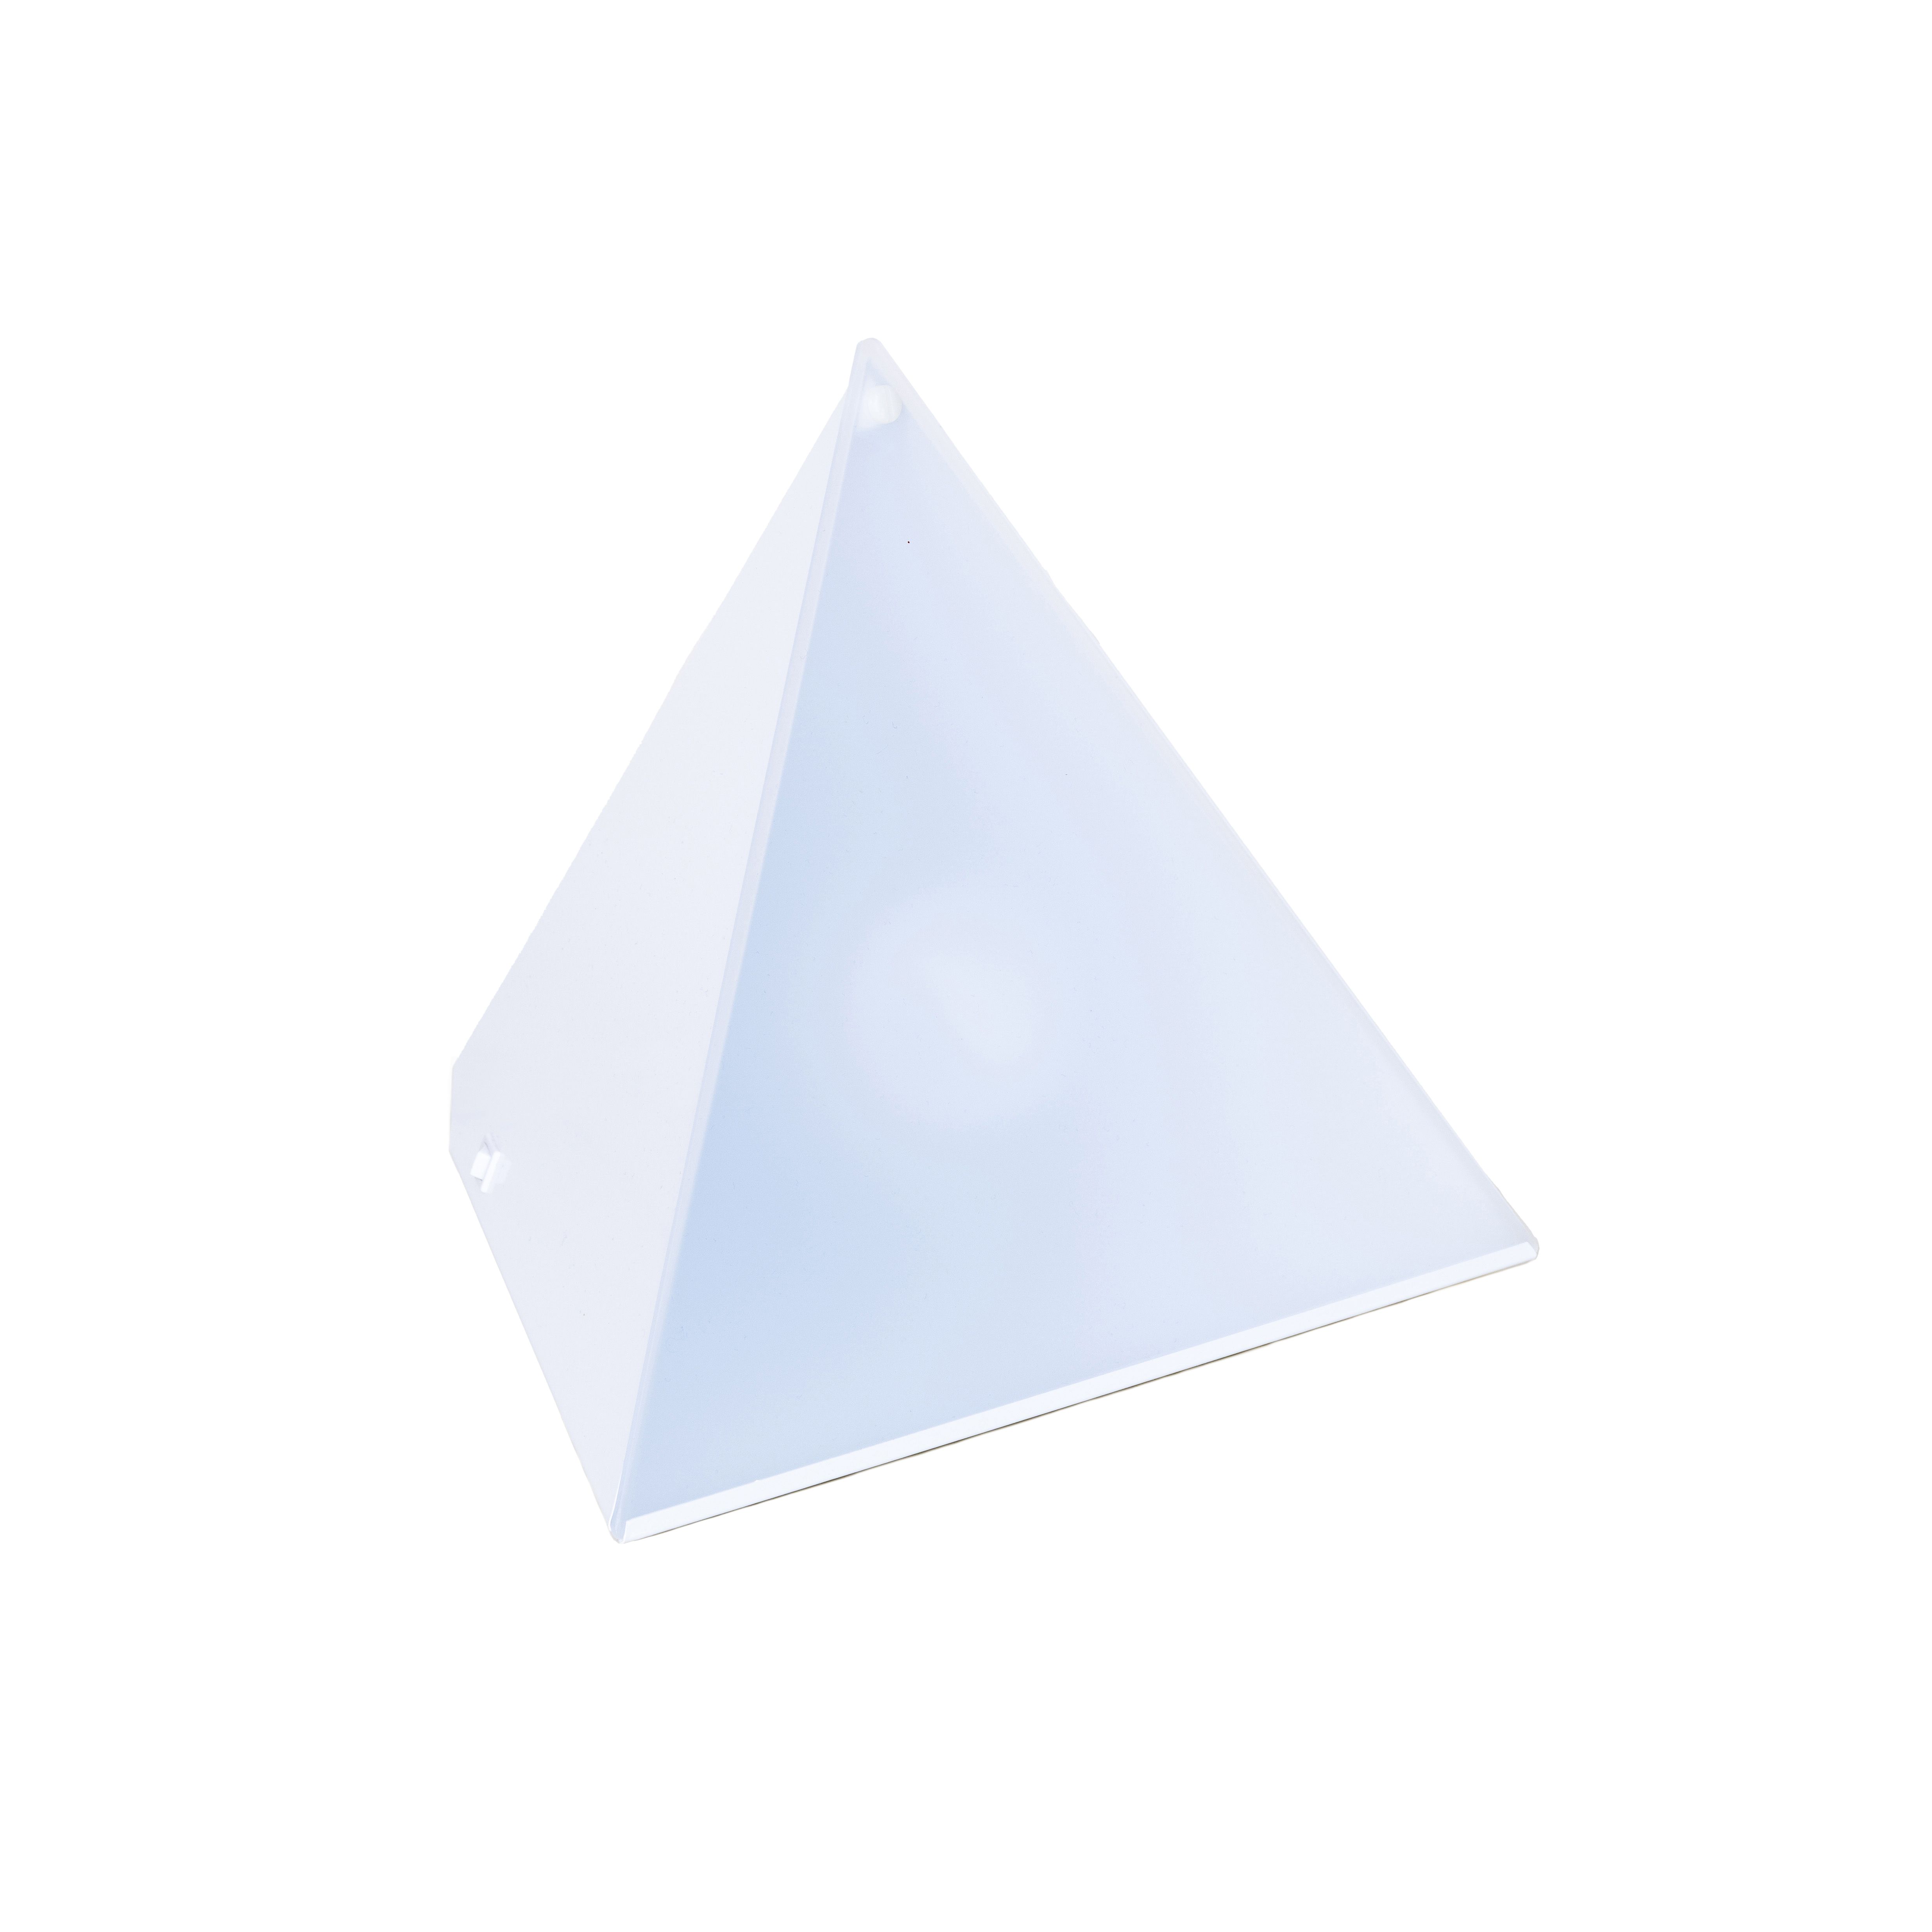 Nlt-lux Luxor Therapy Pyramid Table Lamp